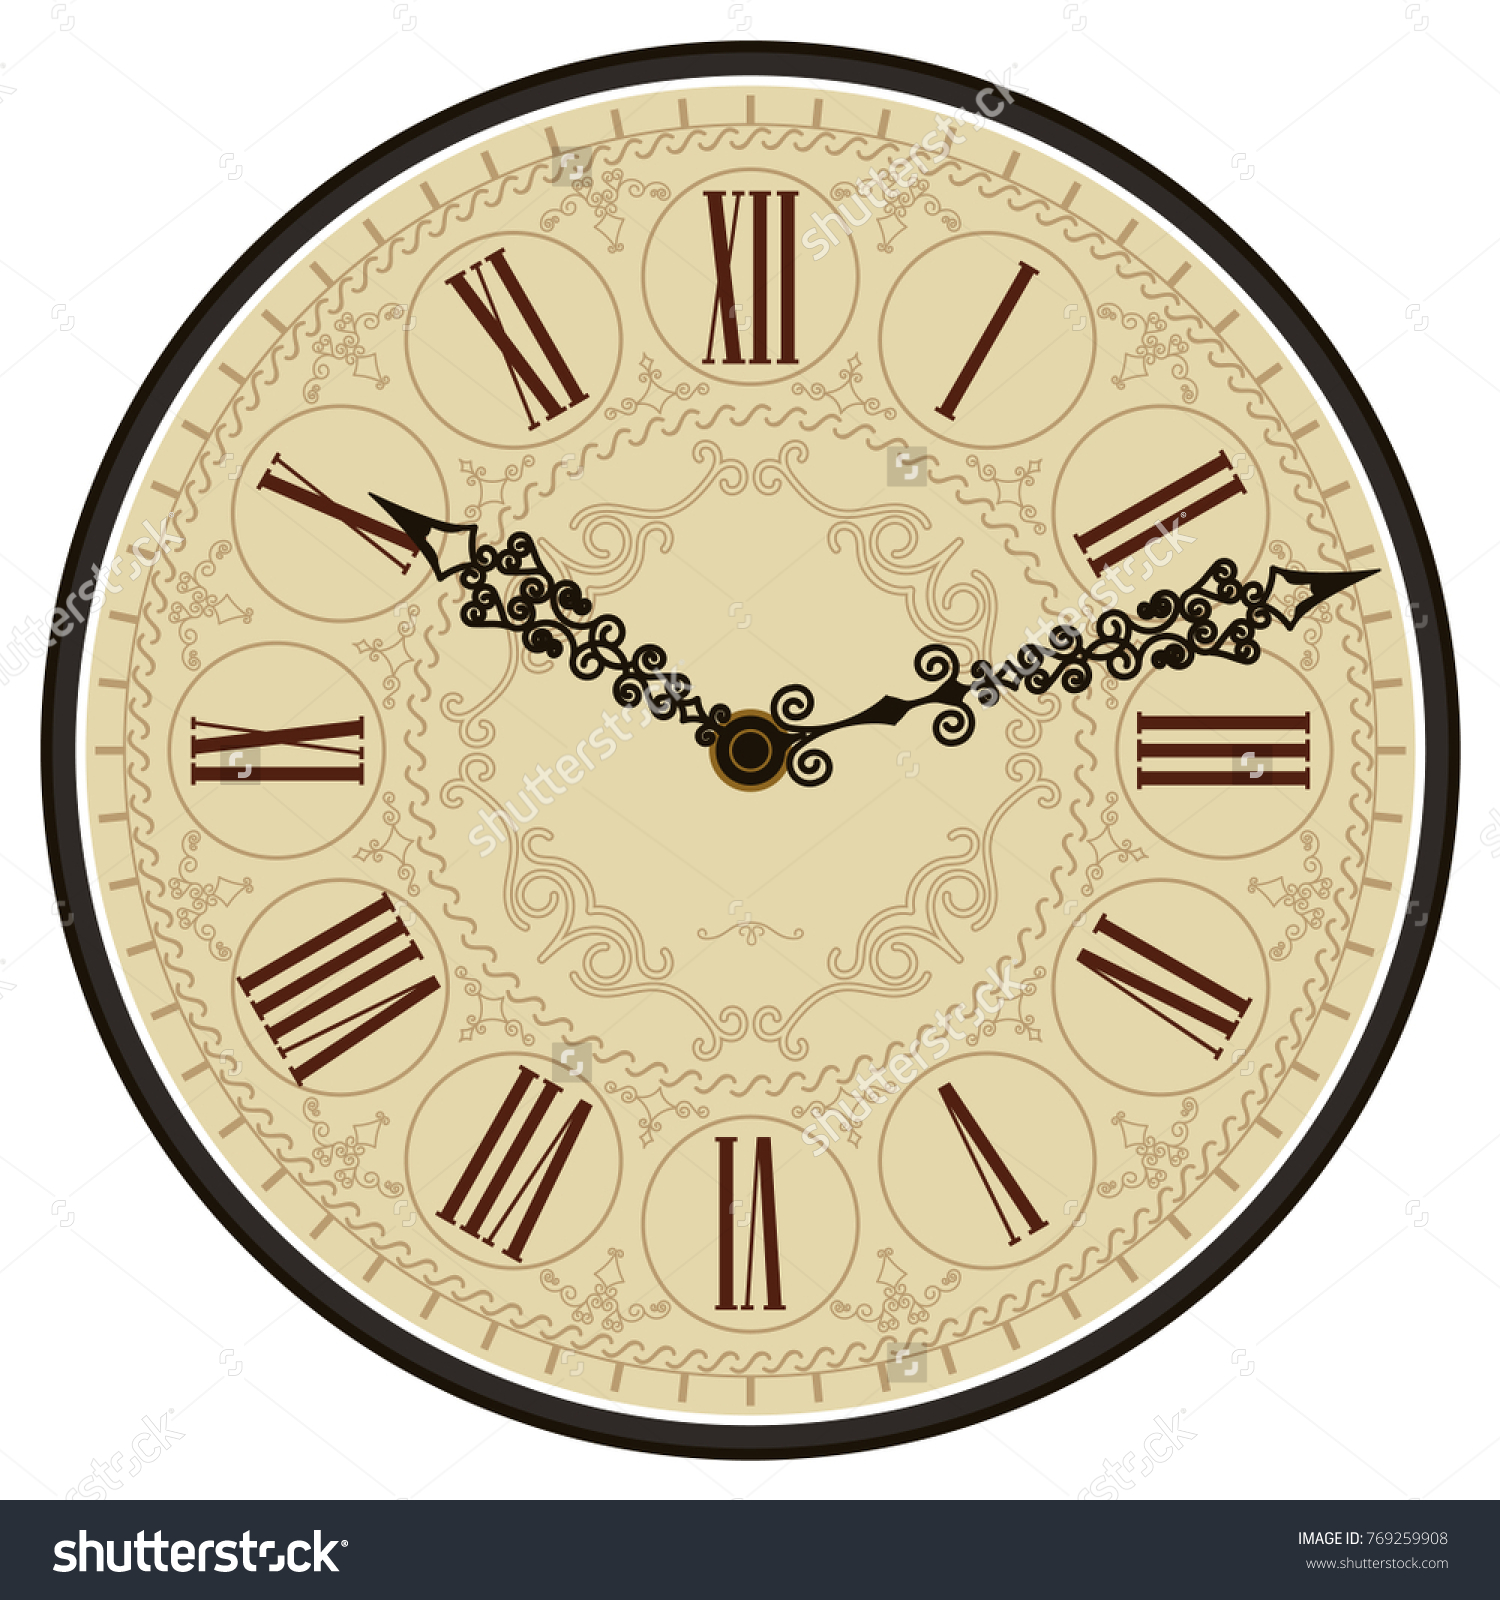 Antique Old Clock Face Old Vintage Stock Photo (Photo, Vector ...